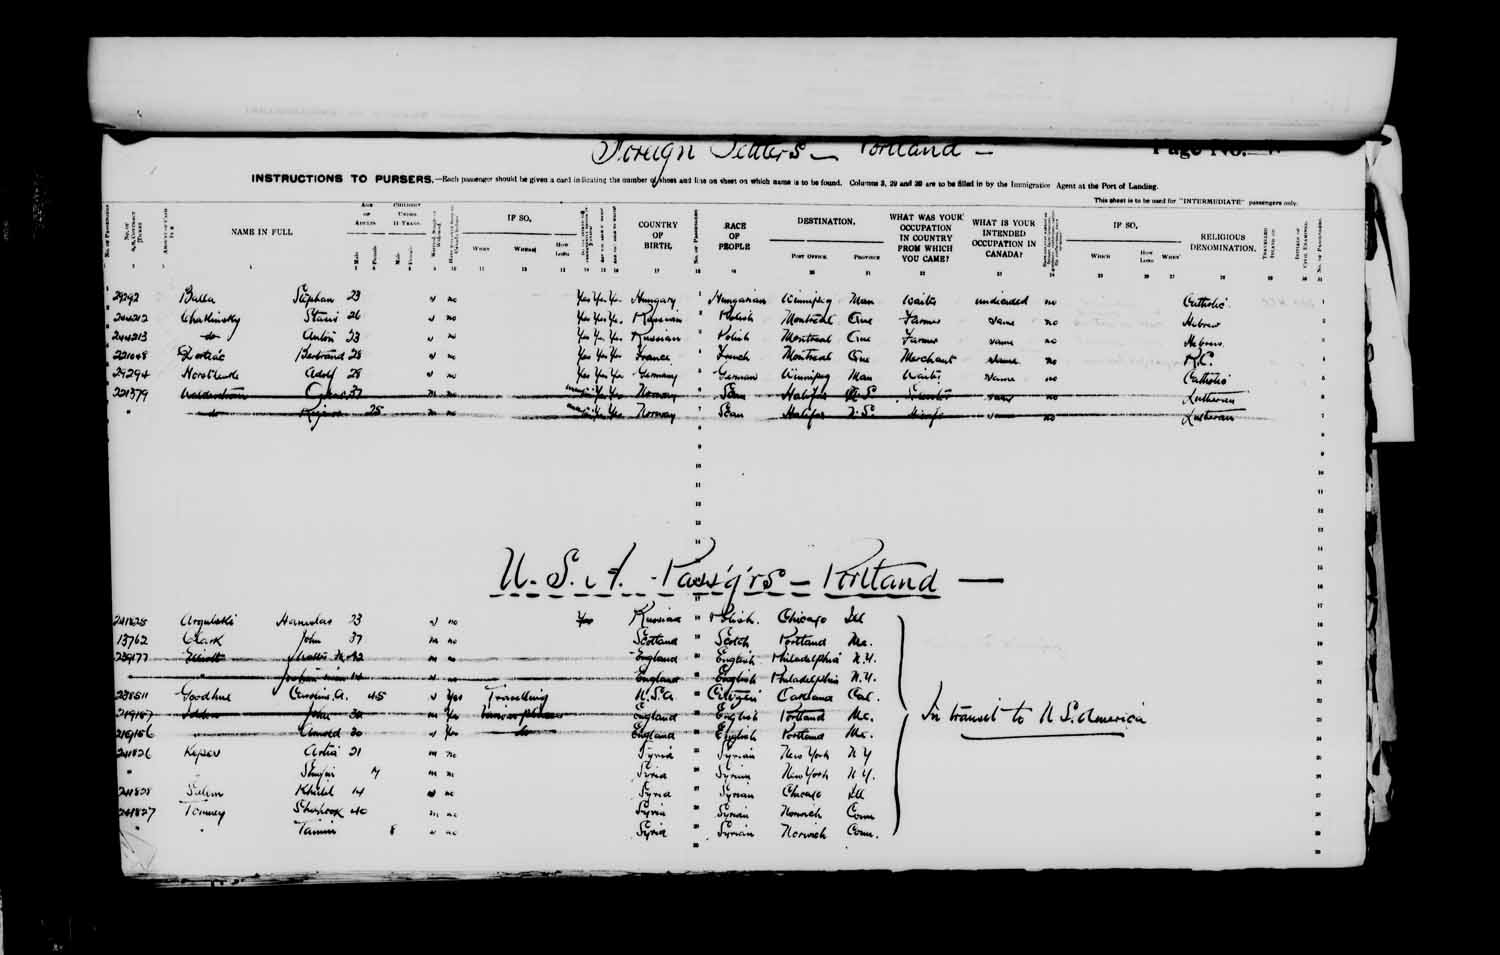 Digitized page of Passenger Lists for Image No.: e003622982